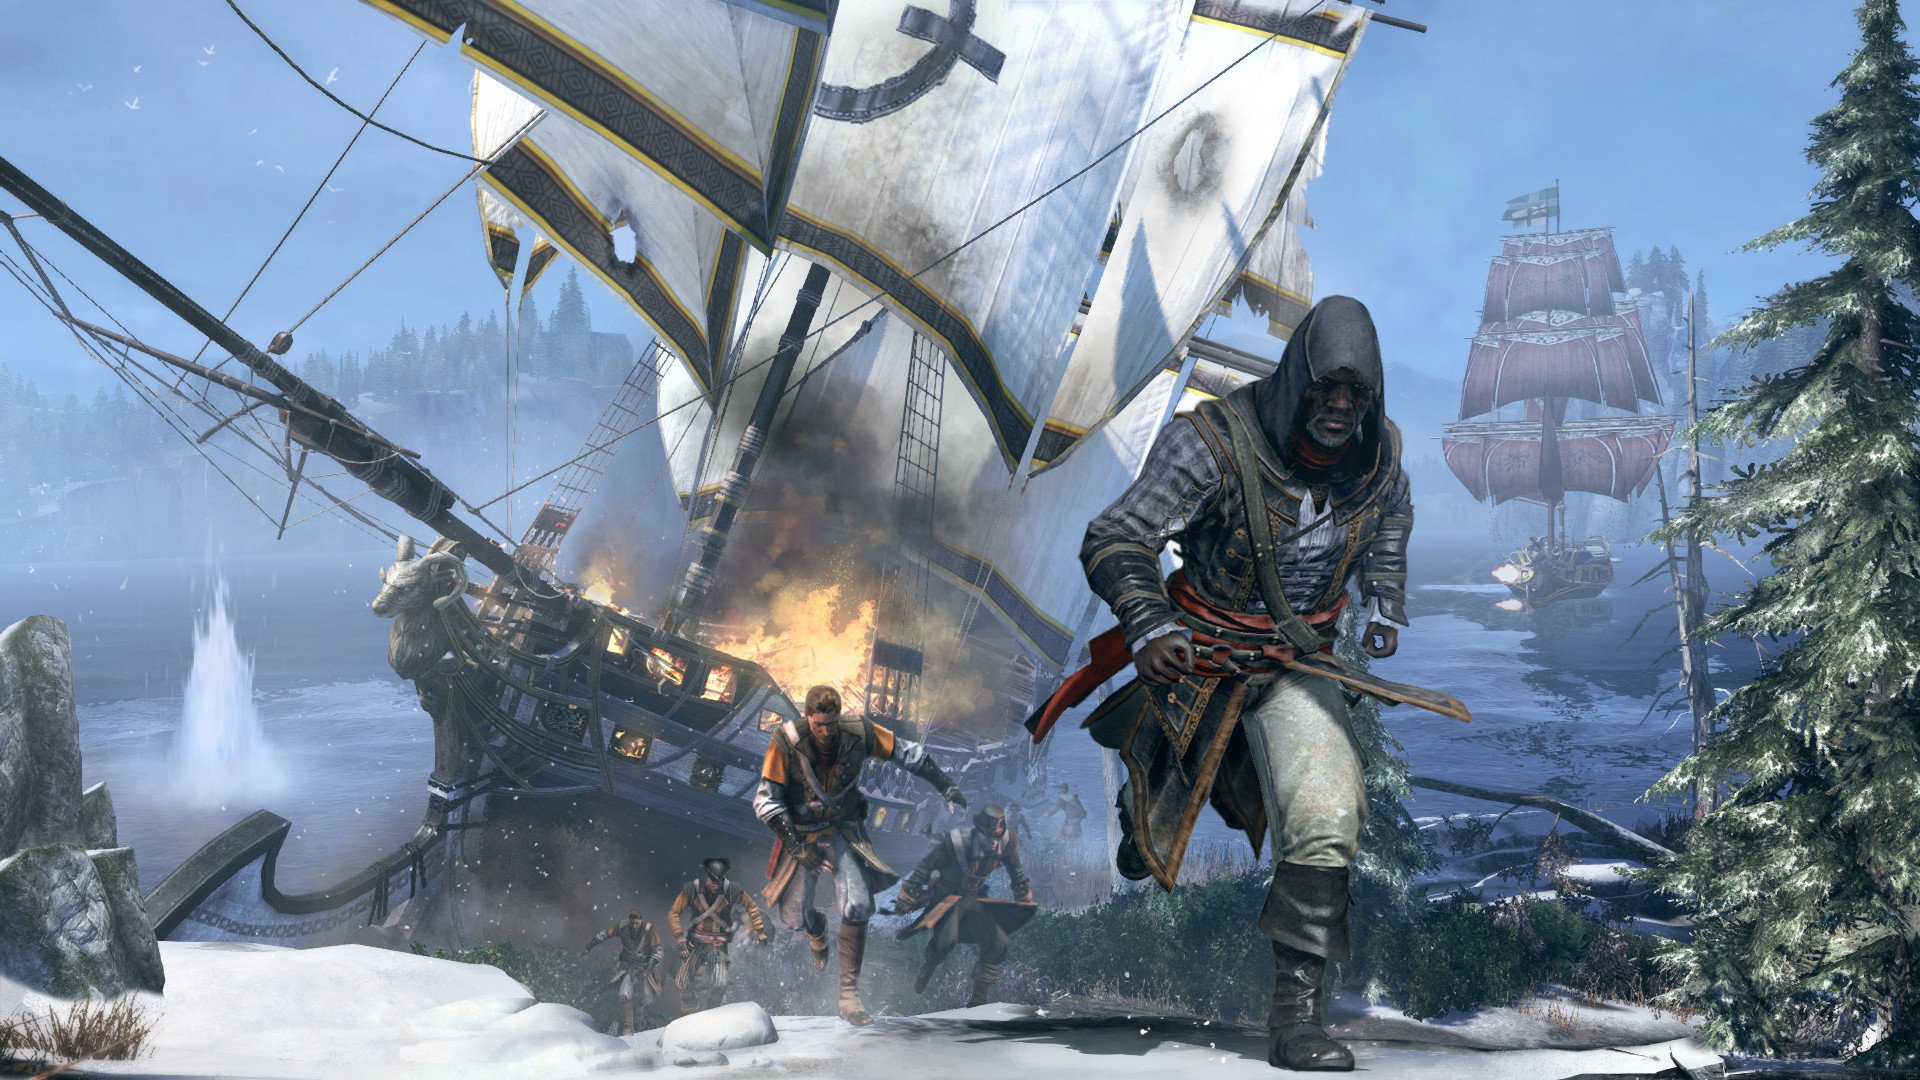 Video Game Assassin 039 S Creed Rogue 1920x1080